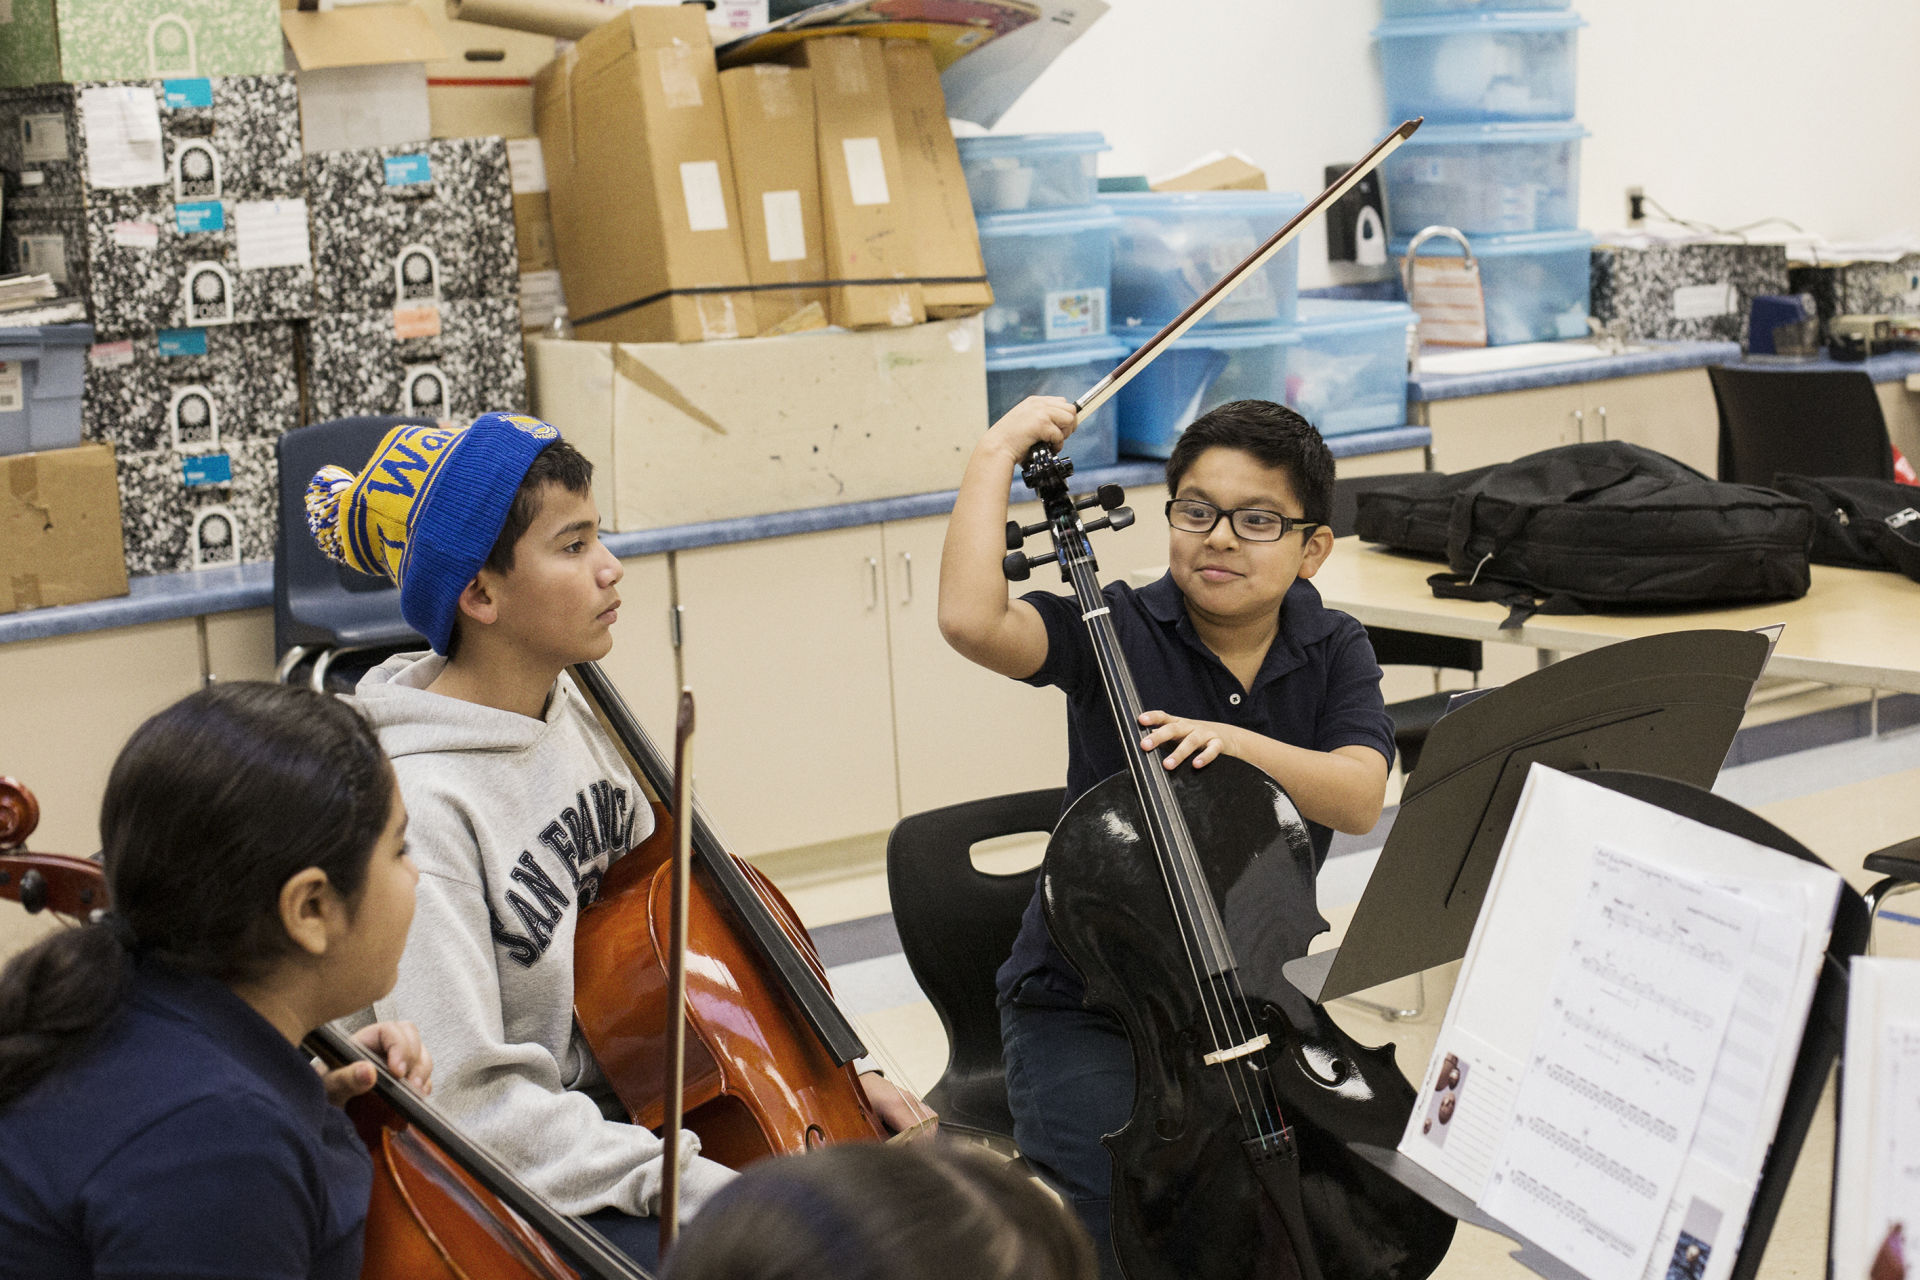 Carlos Garcia (right) chats with other students during the Sound Minds after-school program at Downer Elementary.